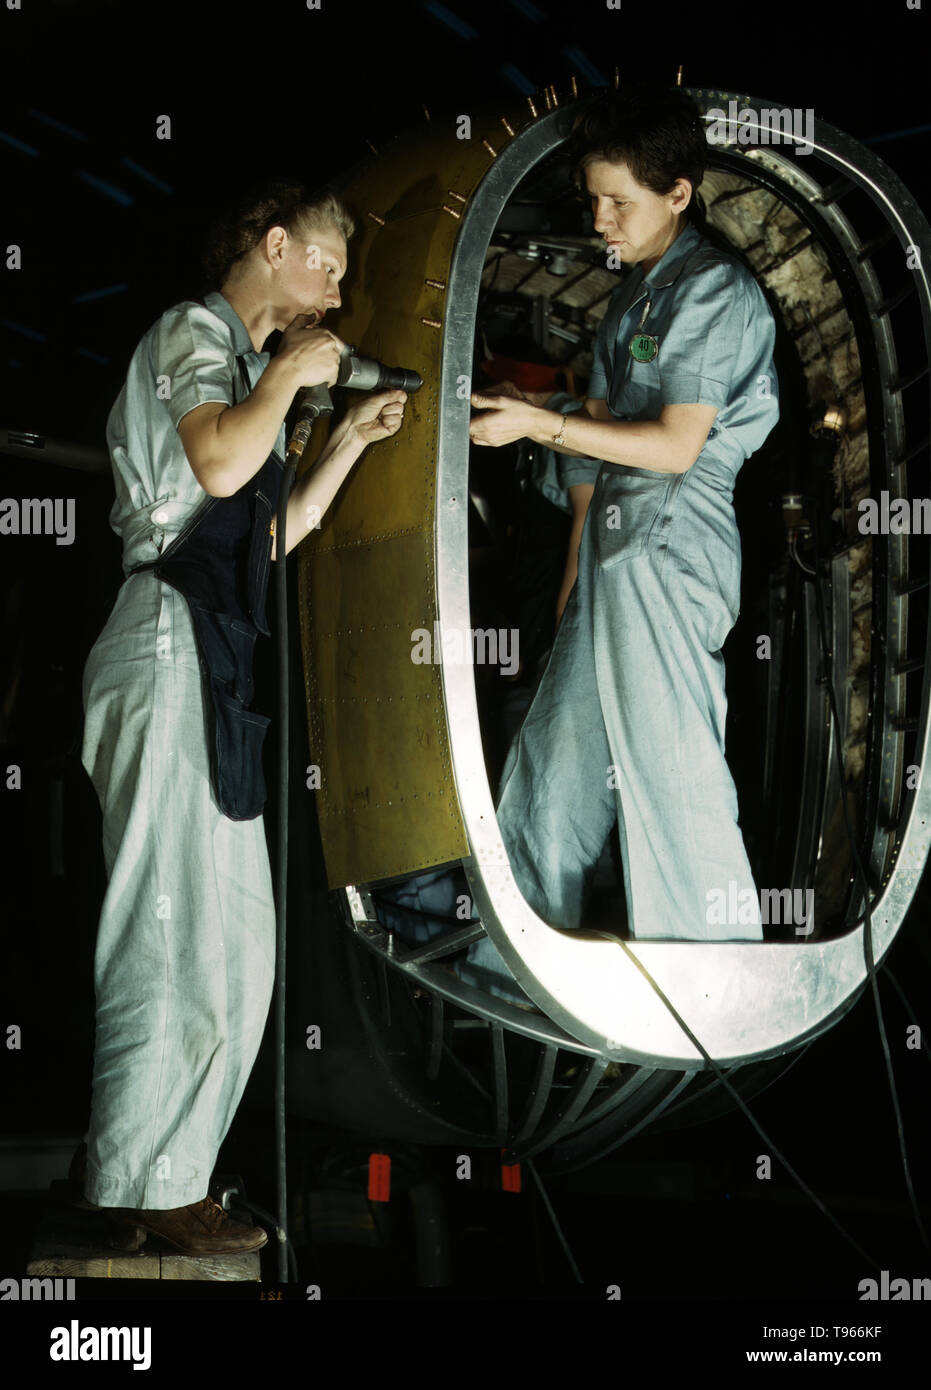 Frances Eggleston, aged 23, came from Oklahoma, used to do office work. Removing paper from pilot's window(?), Consolidated Aircraft Corp., Fort Worth, Texas. Although the image of 'Rosie the Riveter' reflected the industrial work of welders and riveters, the majority of working women filled non-factory positions in every sector of the economy. What unified the experiences of these women was that they proved to themselves, and the country, that they could do a man's job and could do it well. Photographed by Howard R. Hollem, 1942. Stock Photo